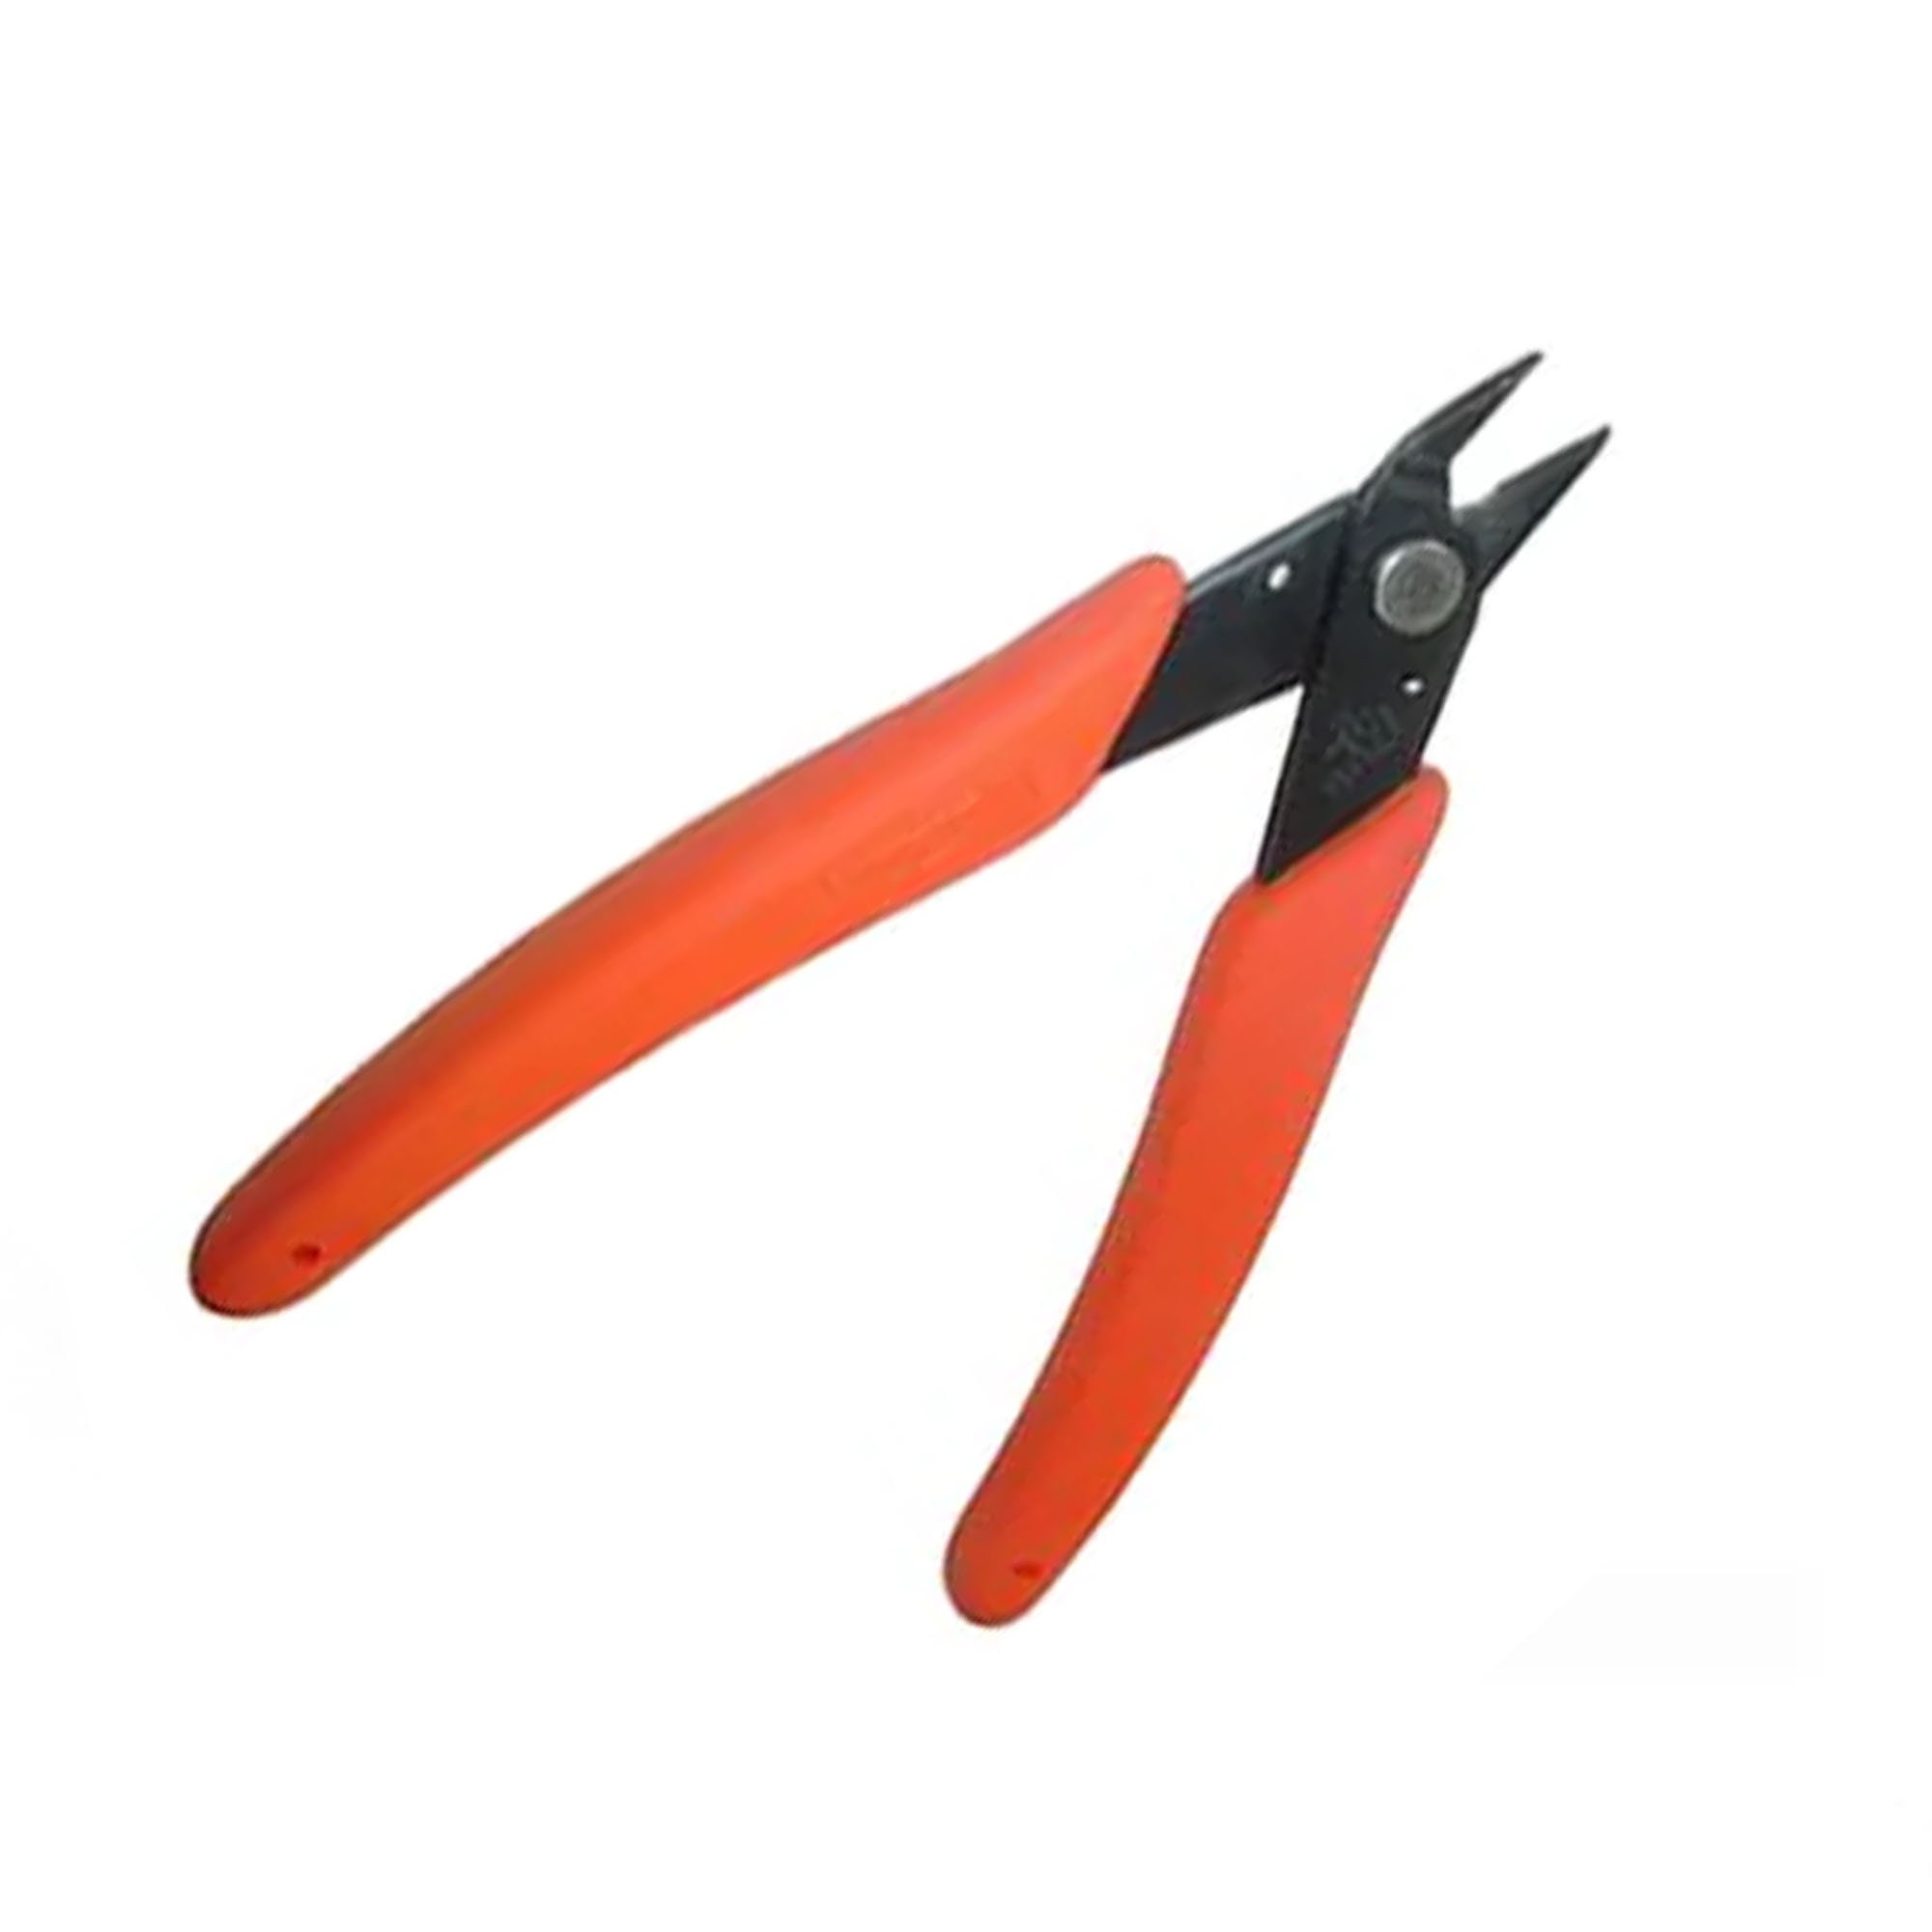 Xuron 410 Micro-Shear Flush Cutter #410 Flush Cuts Soft Wire Up To 18  Awg-1.00mm